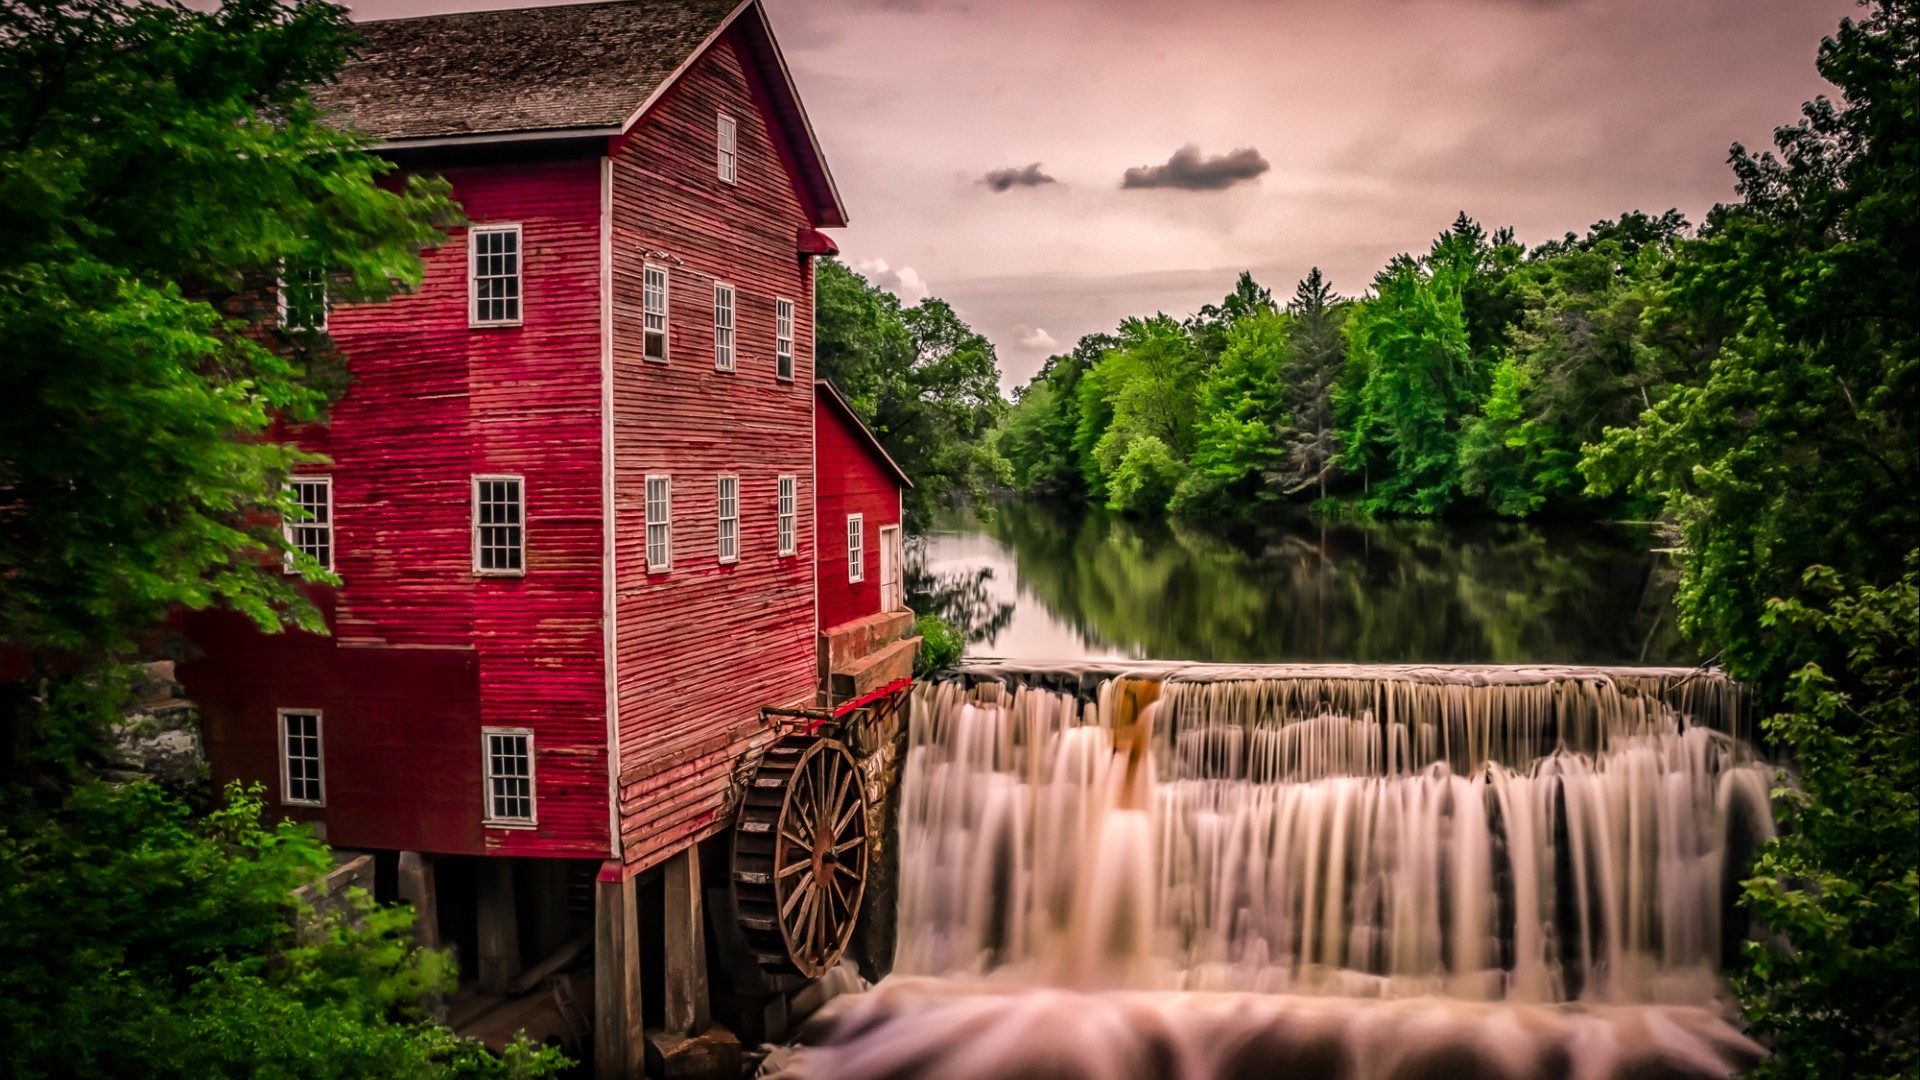 General 1920x1080 nature landscape architecture building water trees mill house old building lake clouds waterfall forest long exposure reflection river